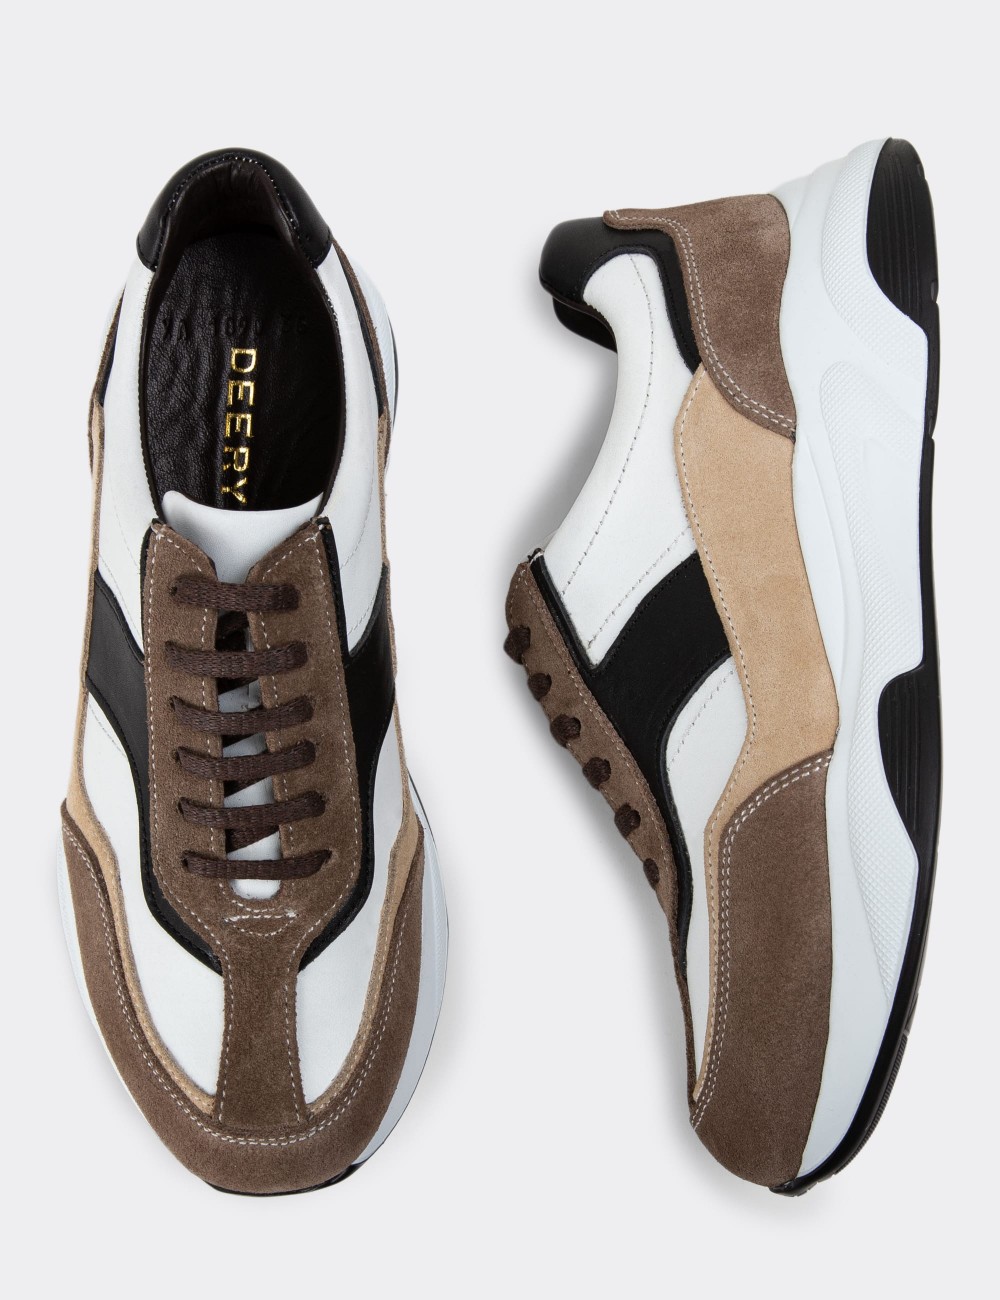 Sandstone Suede Leather Sneakers - 01890ZVZNE01